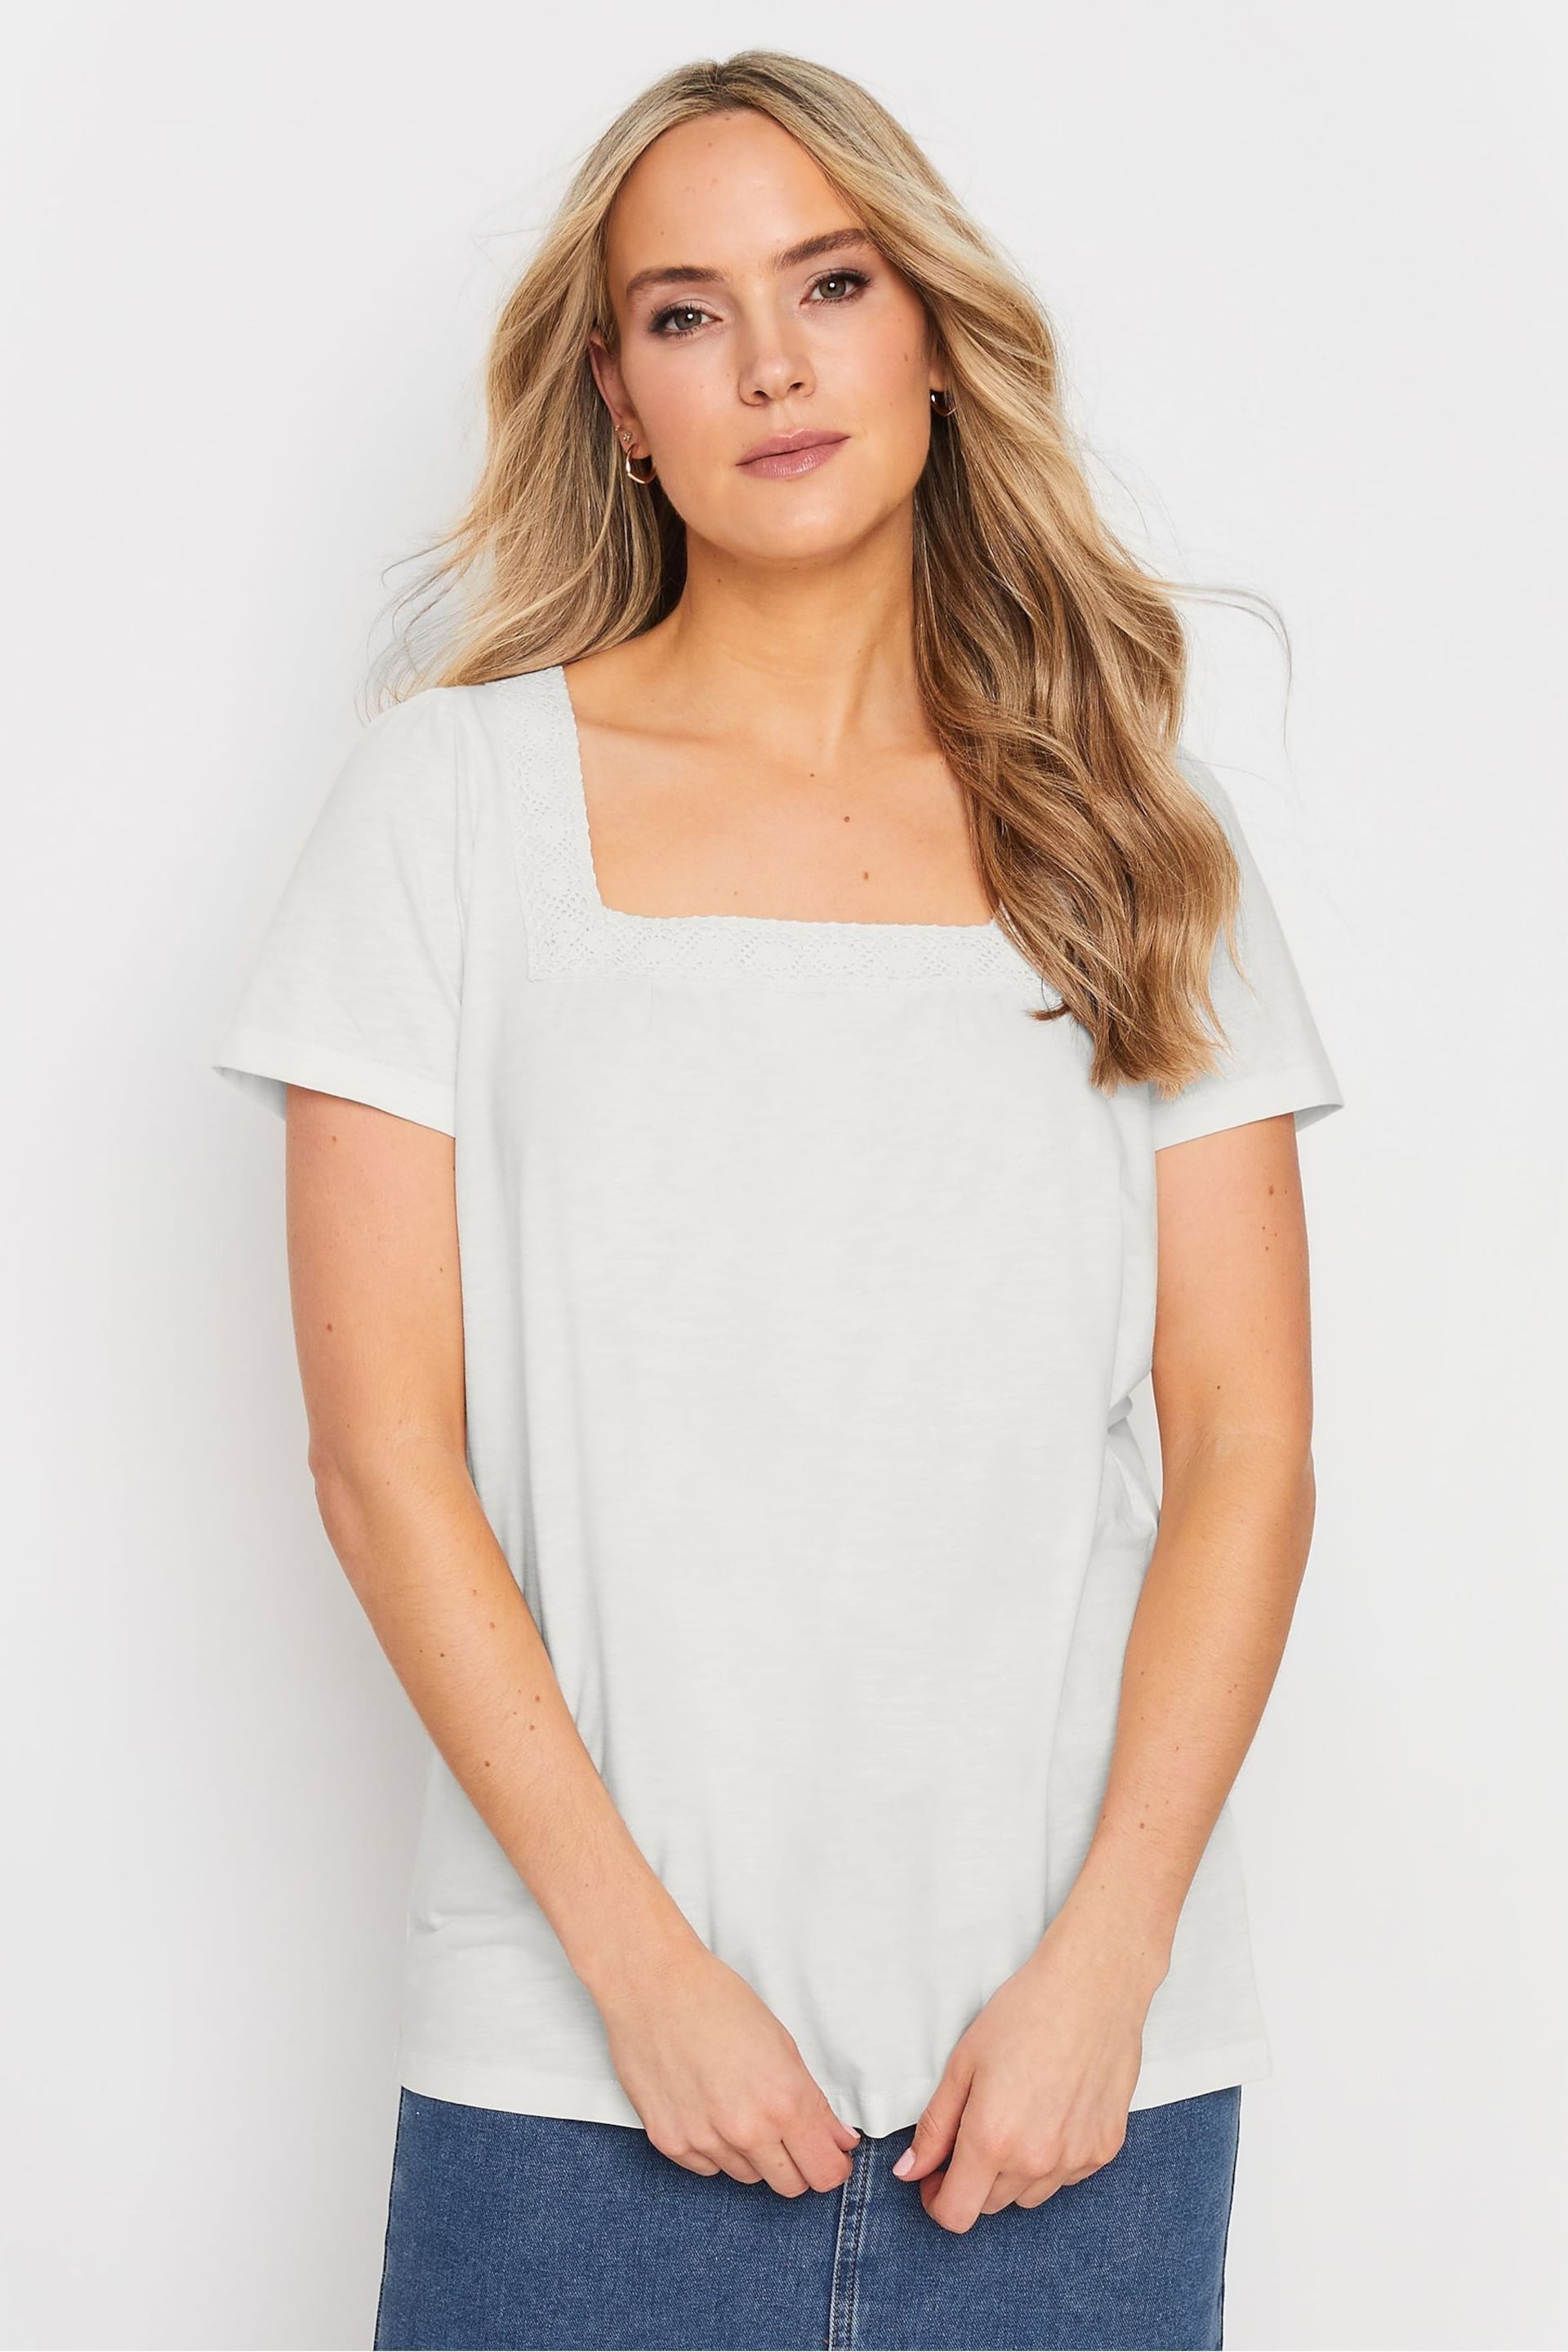 Long Tall Sally Cream Square Neck Crochet Top - Image 1 of 6